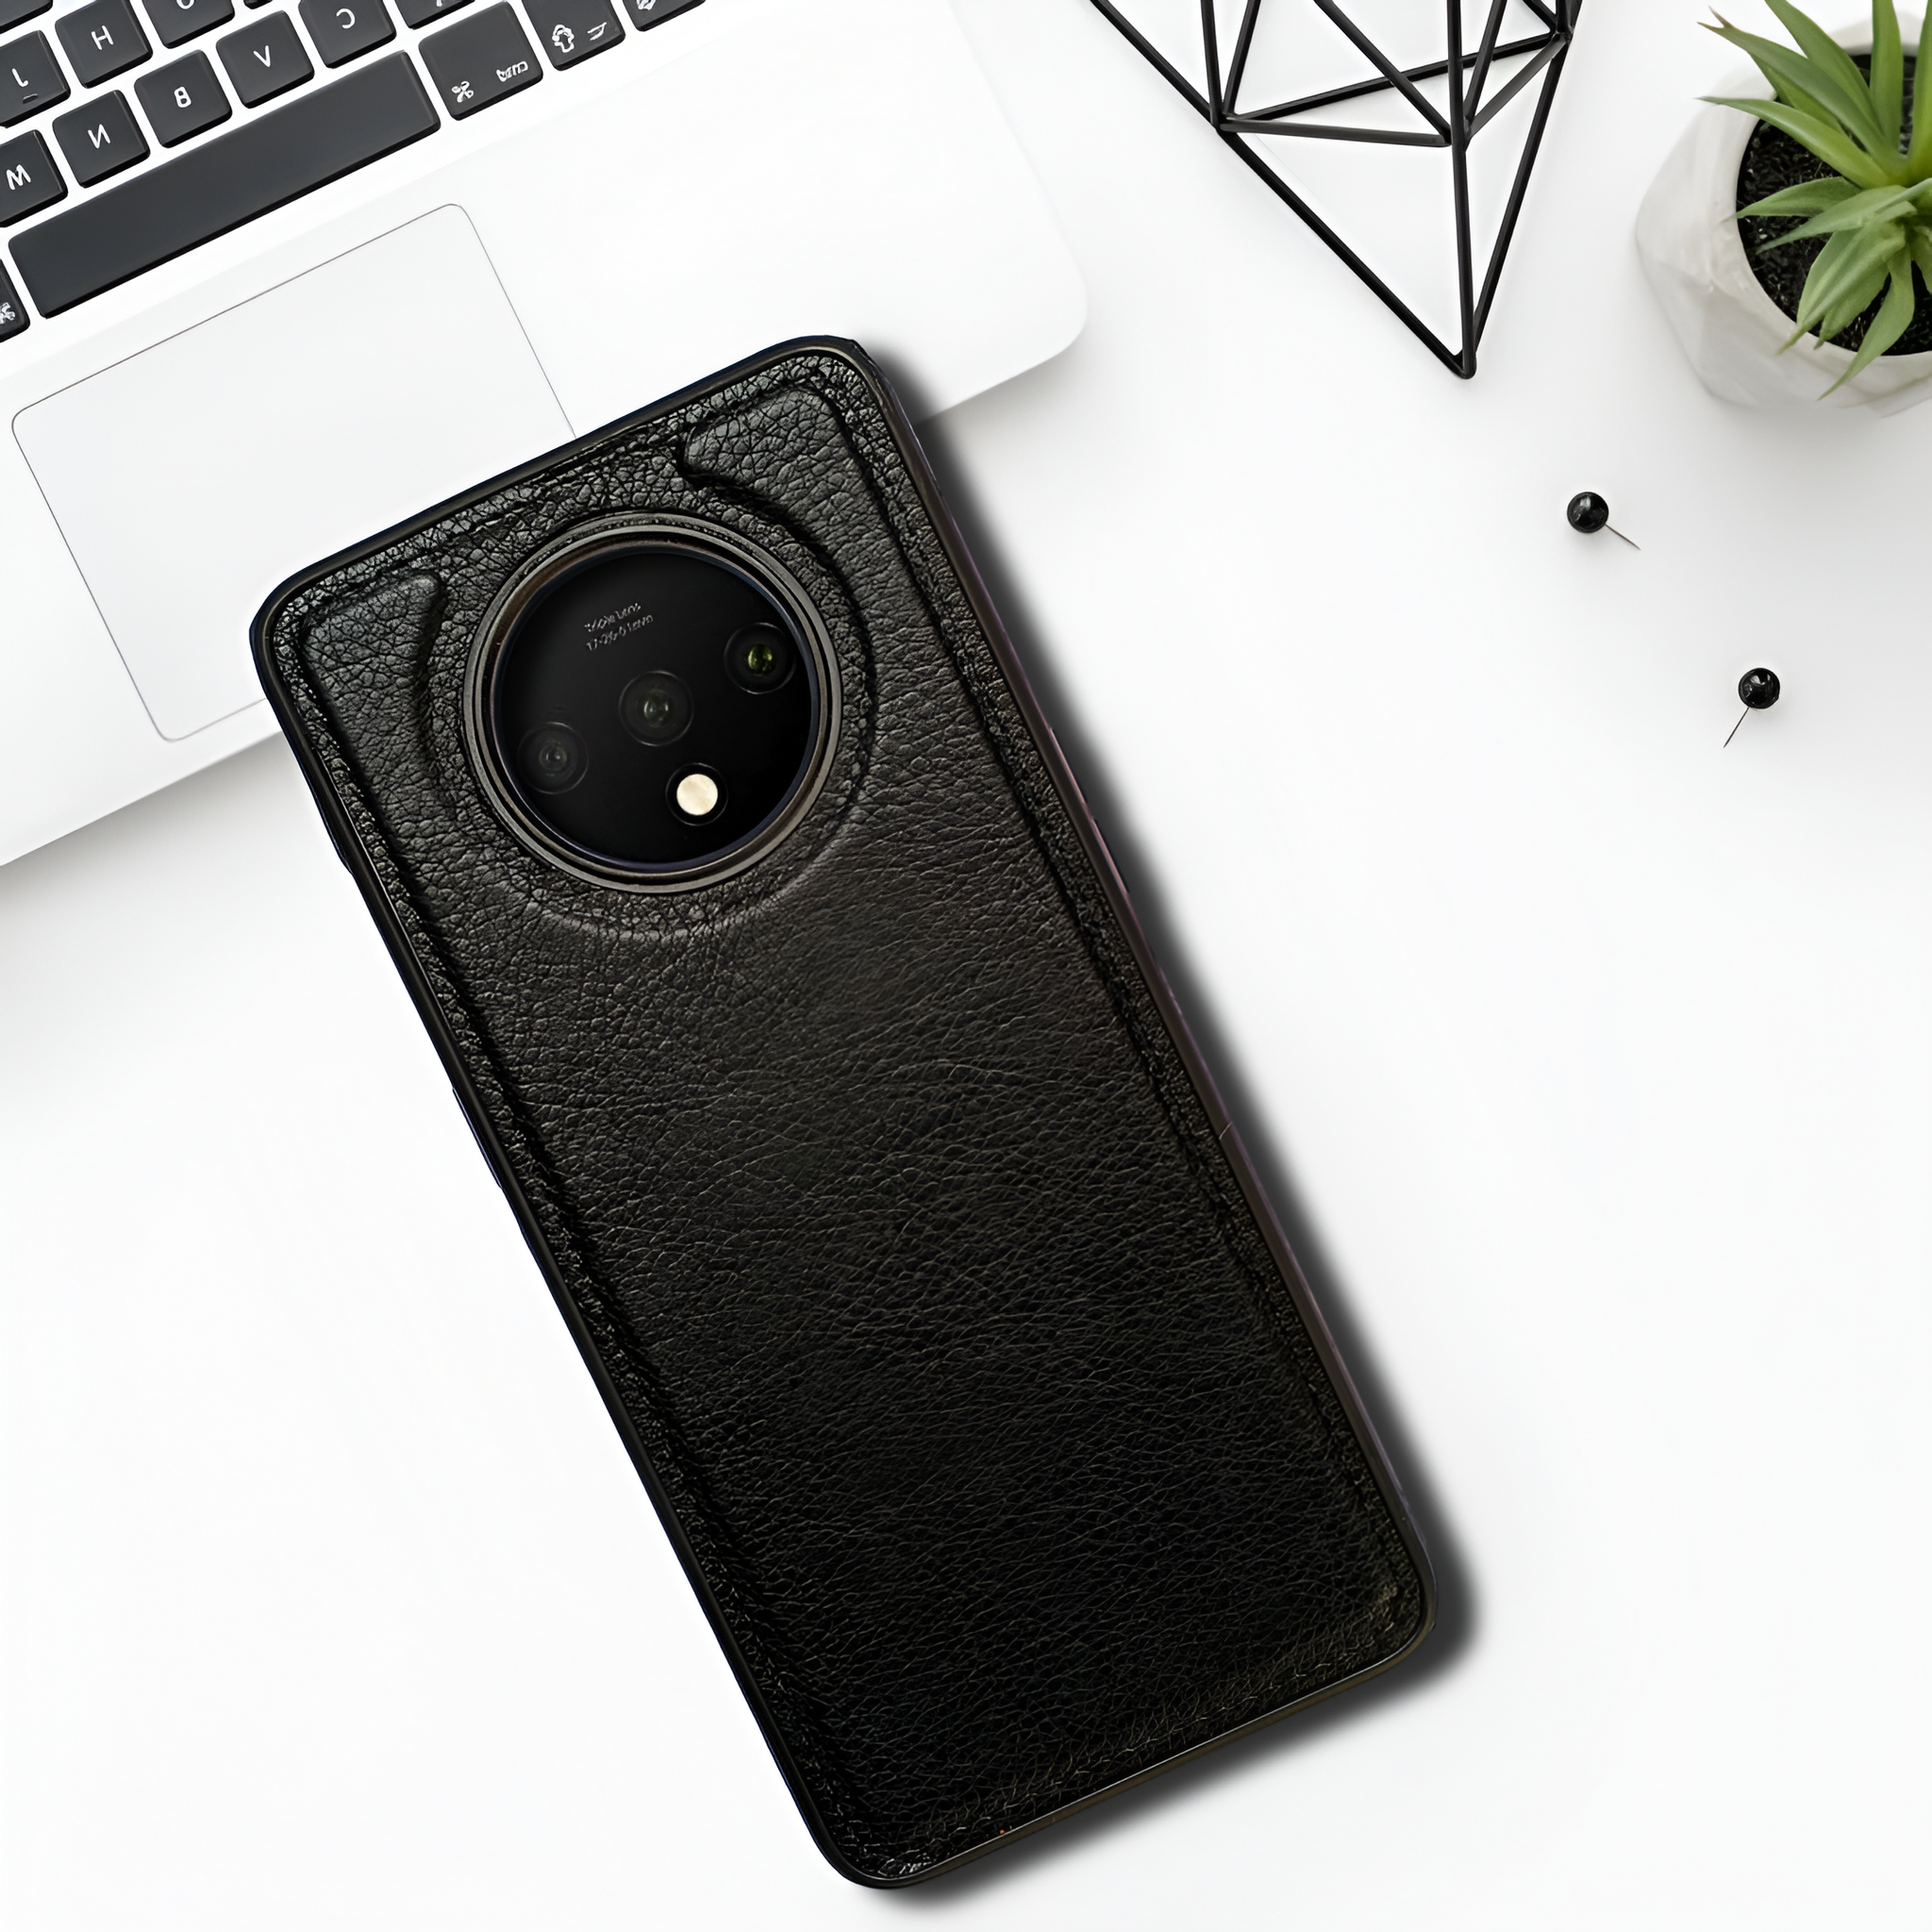 Puloka Black Leather Case for Oneplus 7t